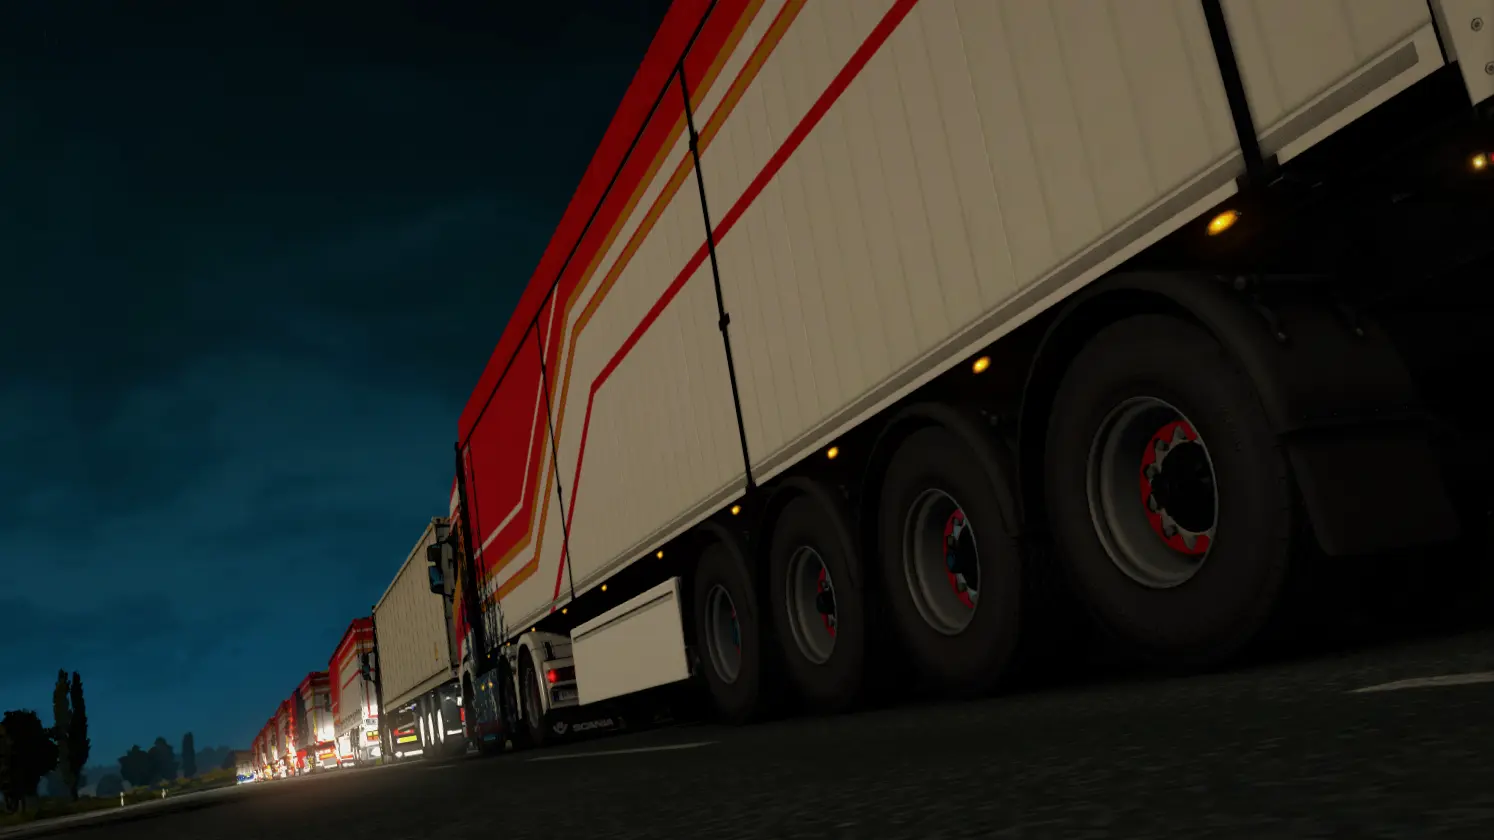 A line of GPE trucks attending a convoy, the time of day is night and its overcast